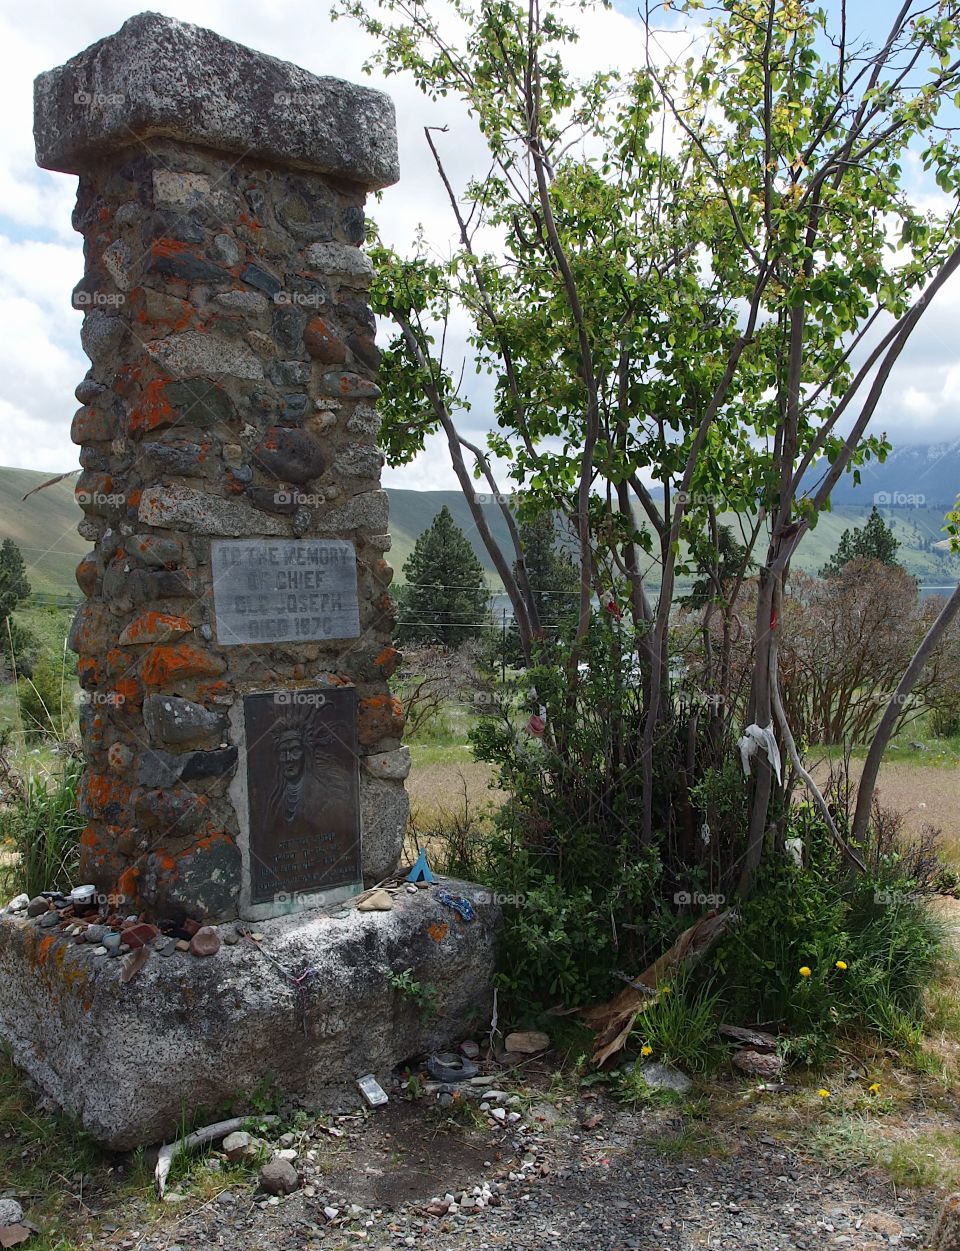 The stone memorial marks the burial site of Chief Joseph in Northeastern Oregon on a spring day. 